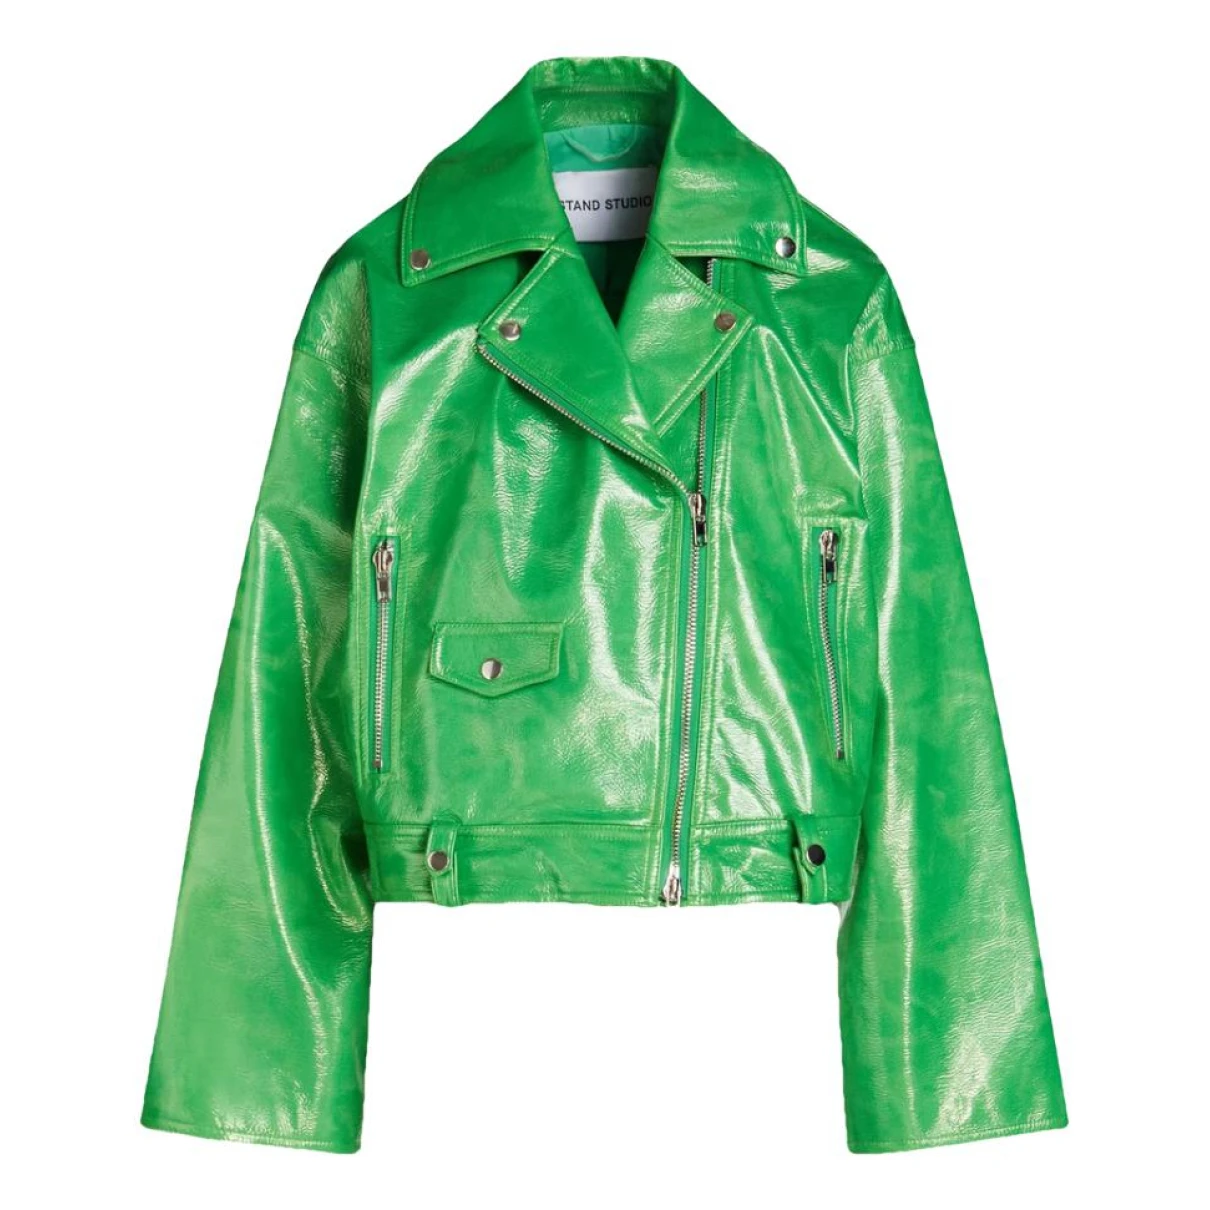 Pre-owned Stand Studio Vegan Leather Jacket In Green